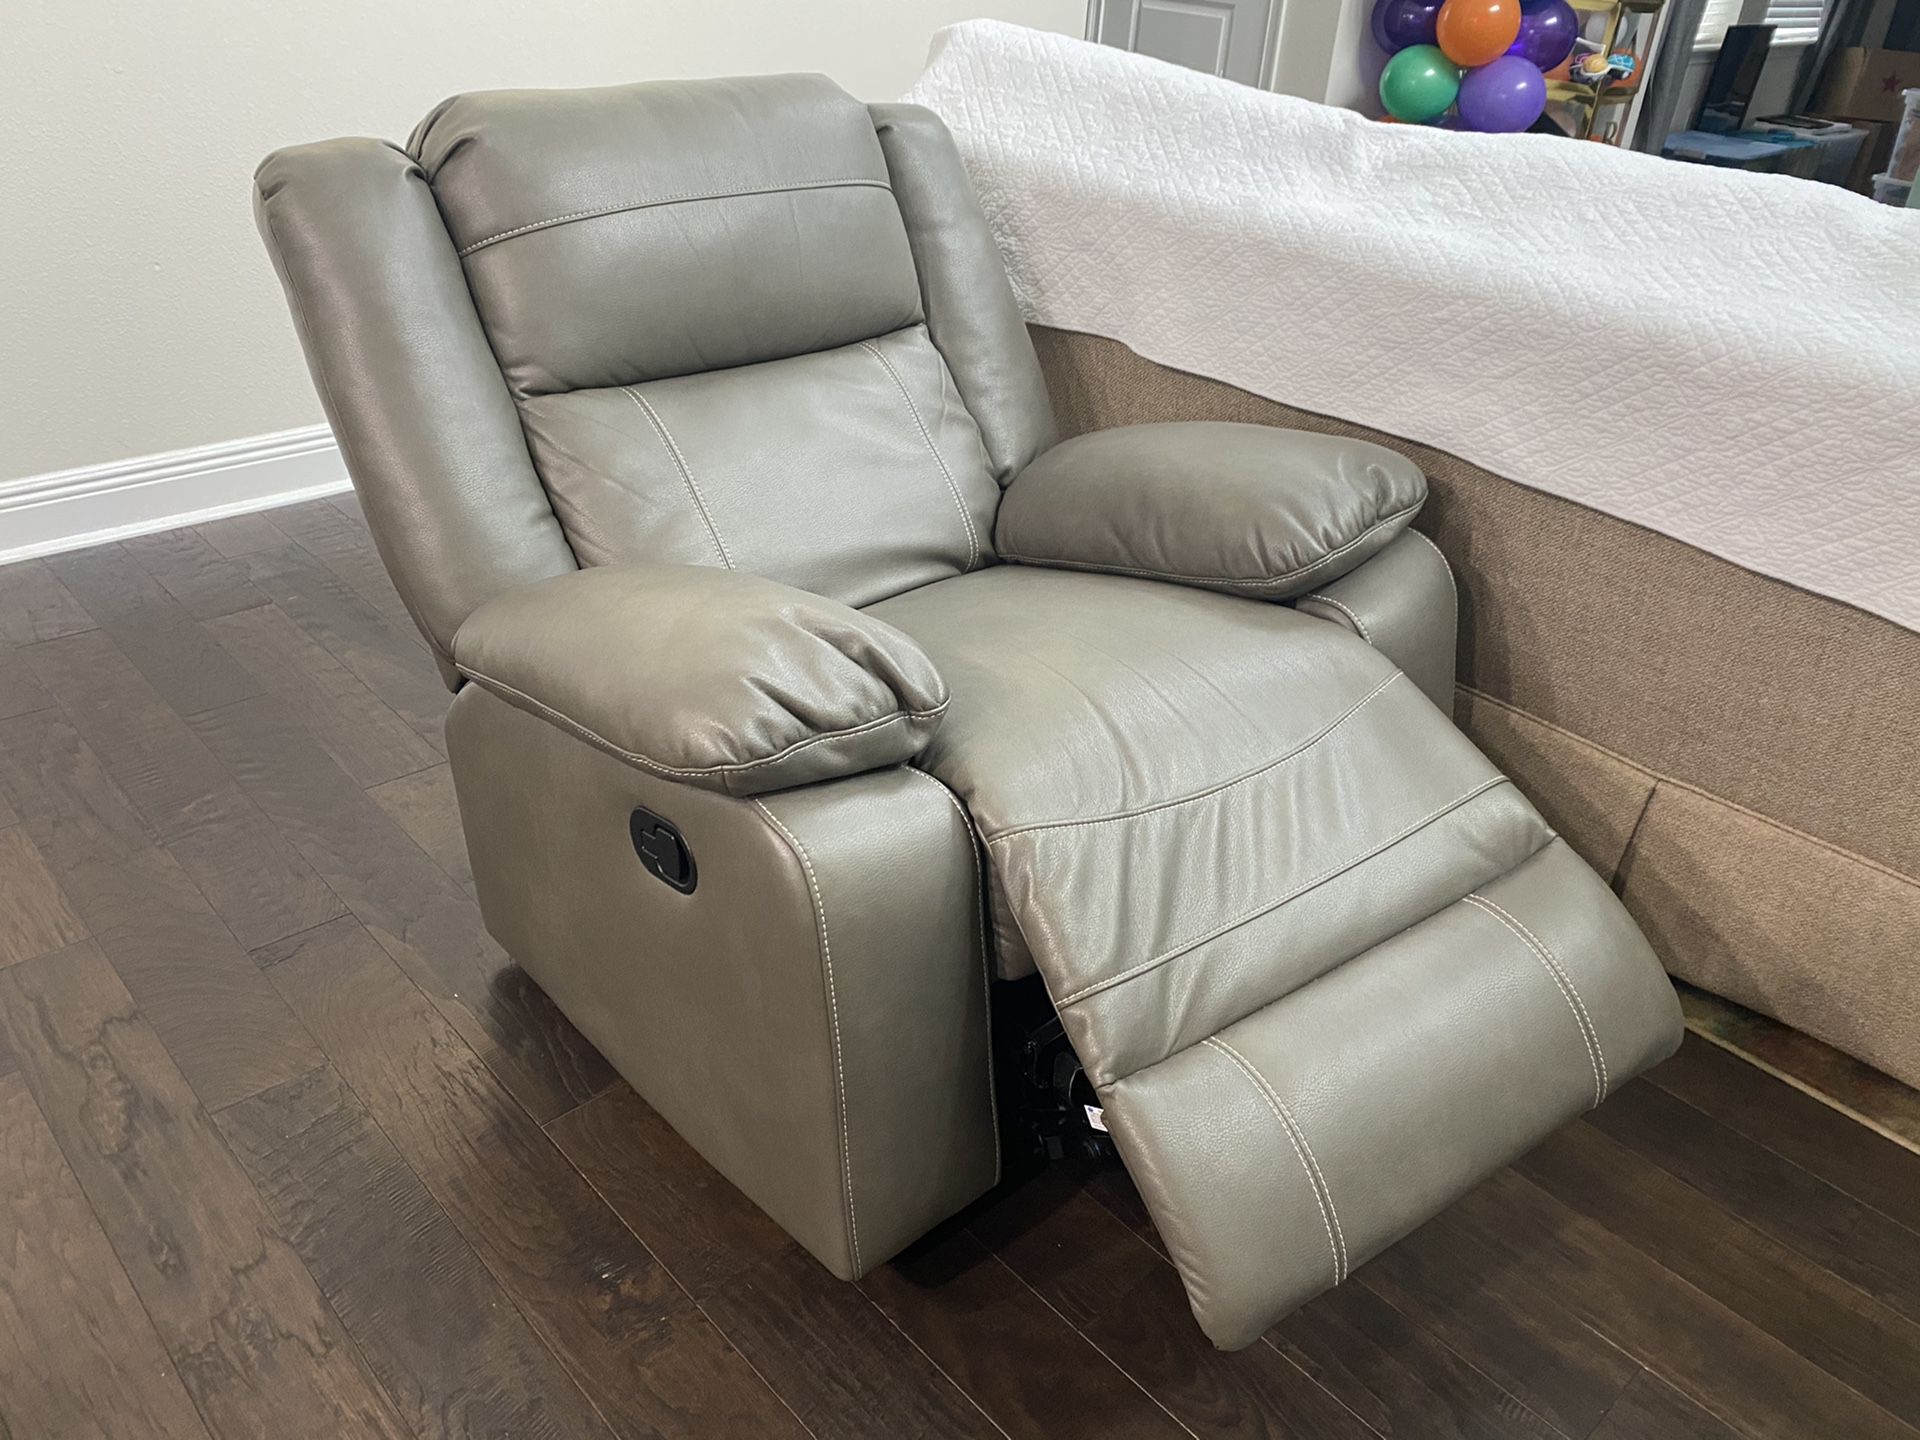 Couch sofa chair grey leather